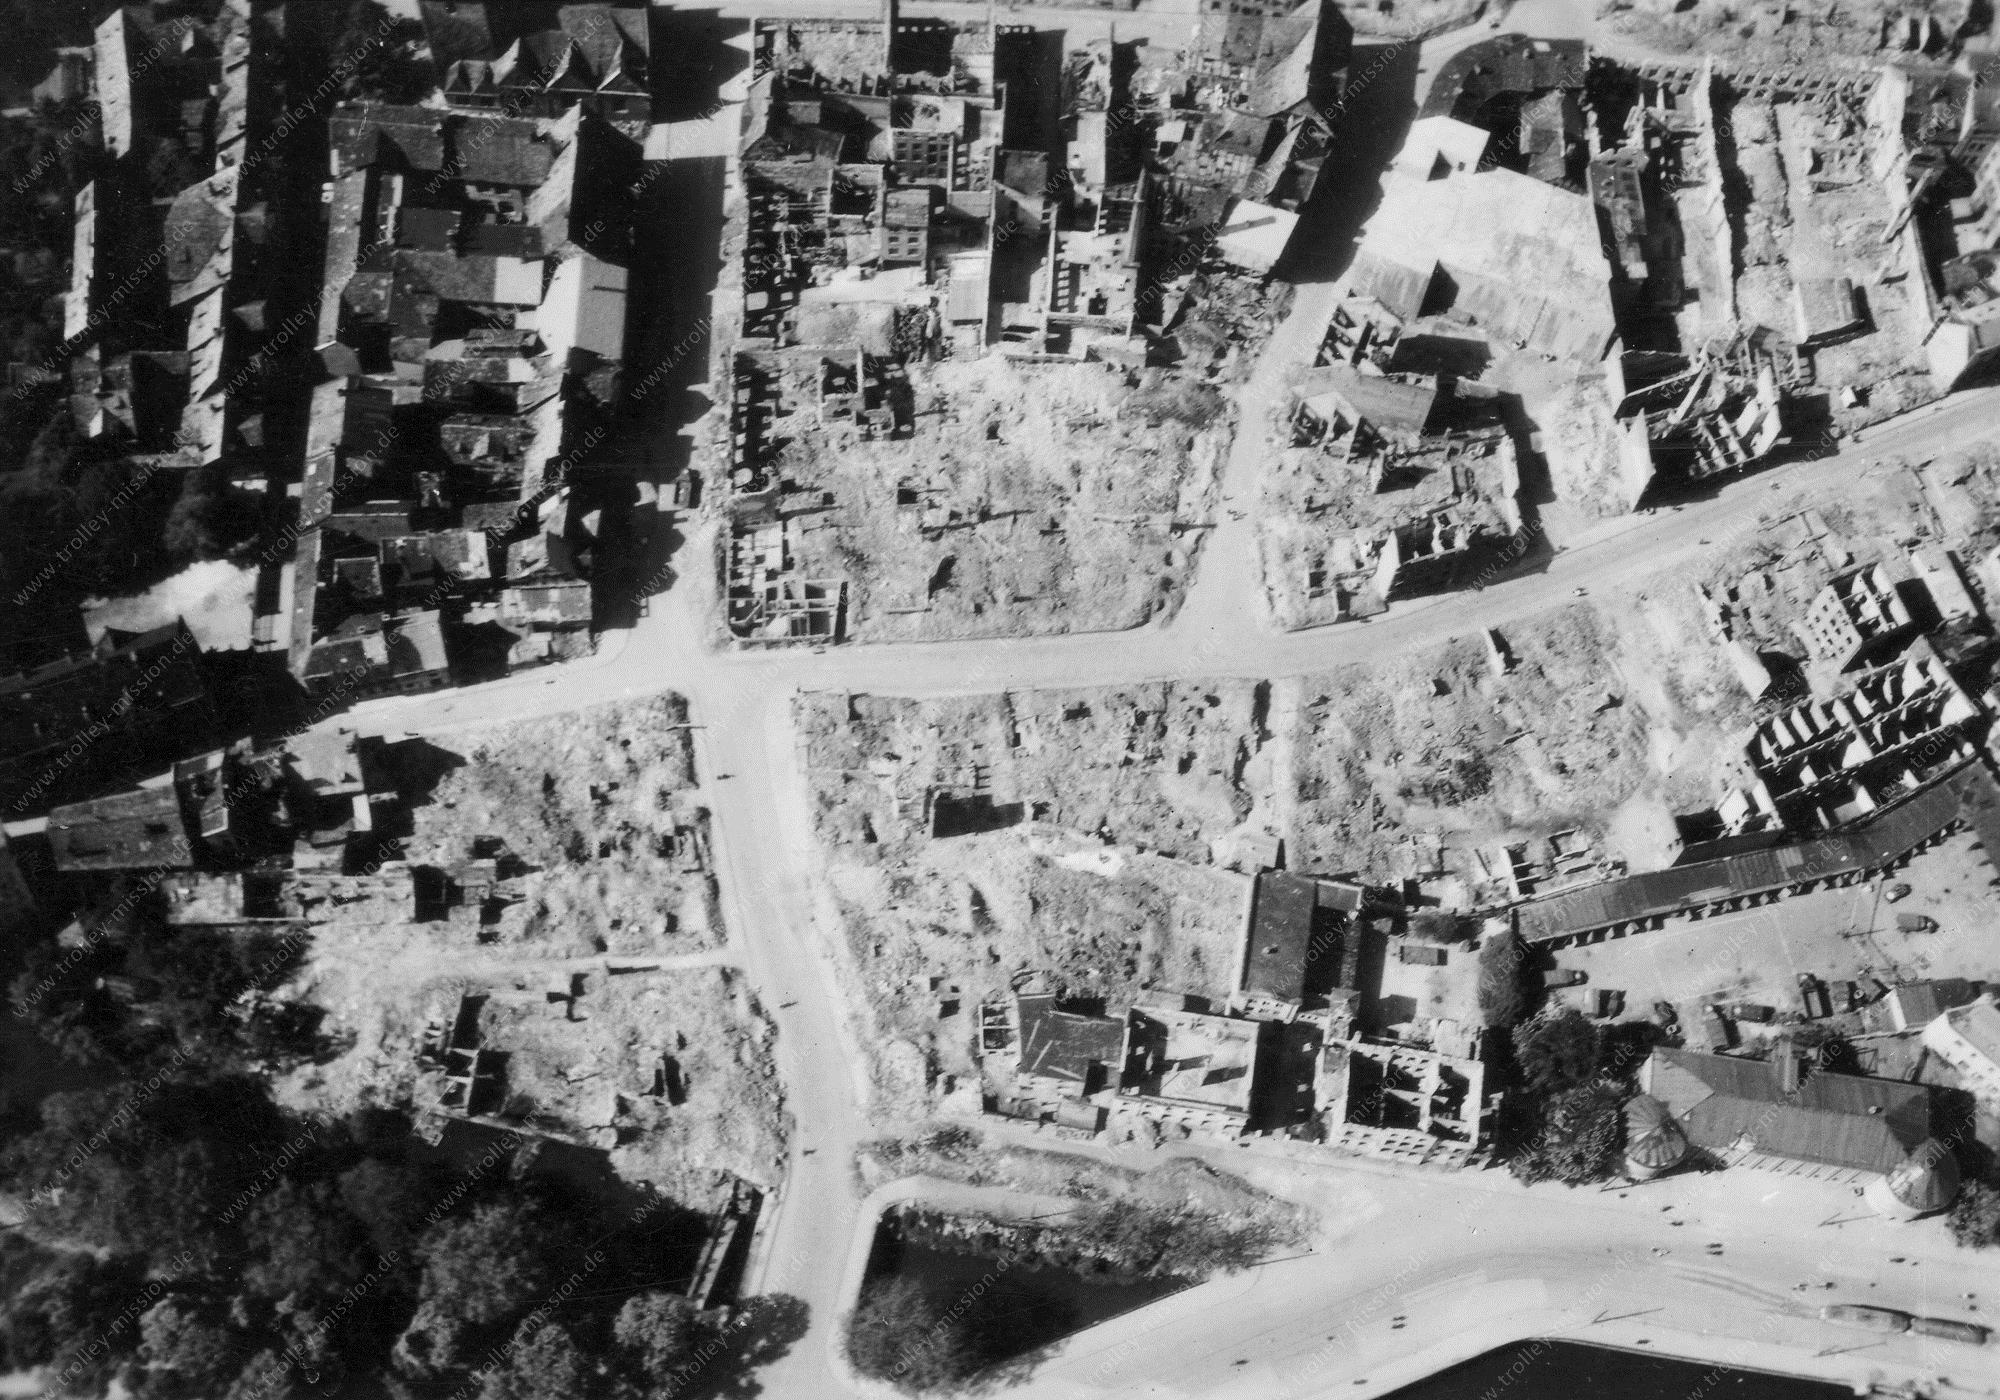 Brunswick from above: Aerial view after Allied air raids in World War II